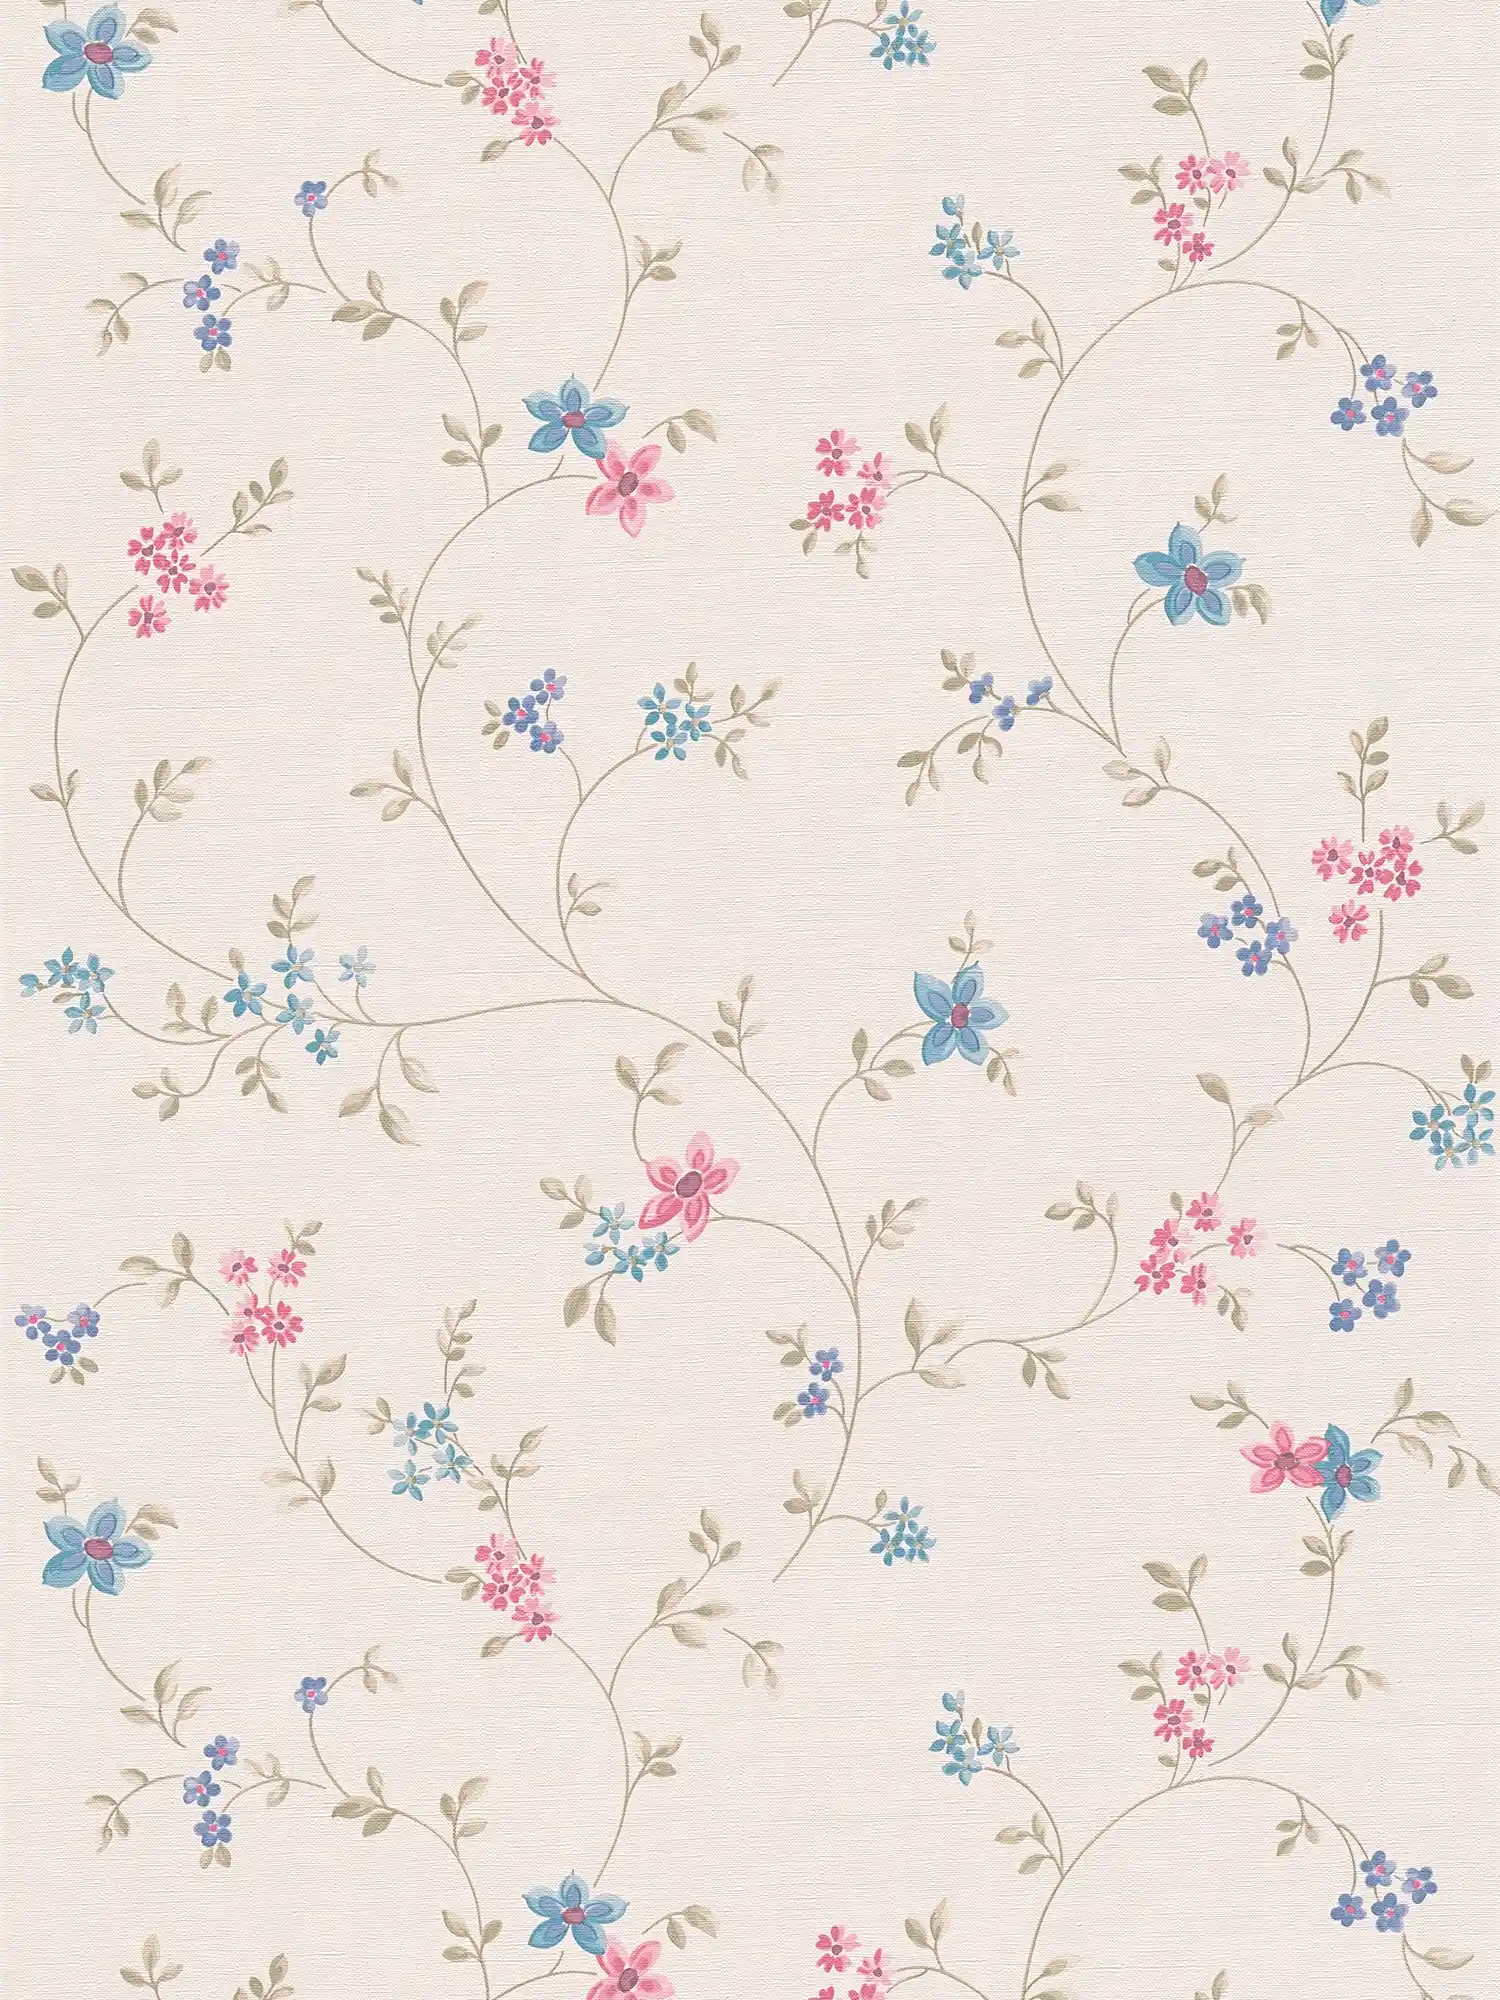 Non-woven wallpaper with floral tendrils - cream, green, pink
